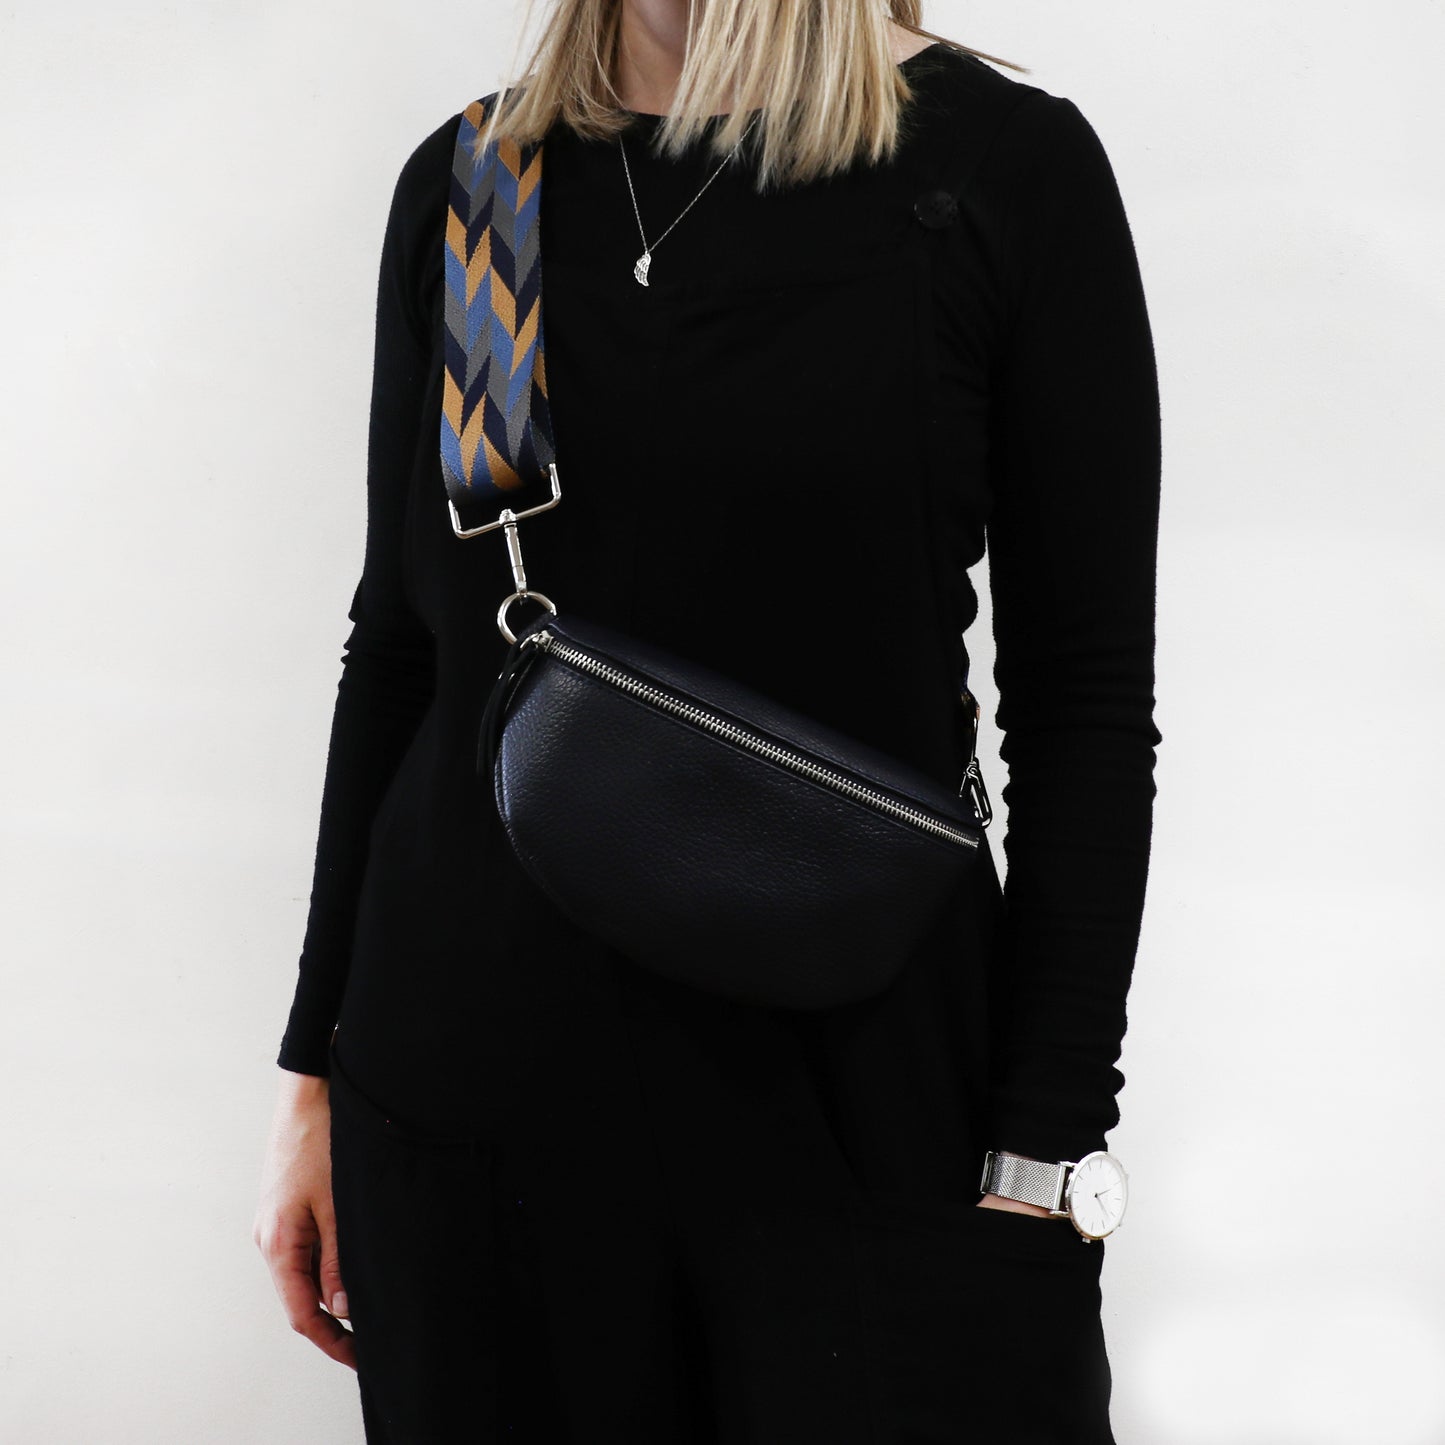 Leather Bum Bag with Patterned Strap – Navy Blue